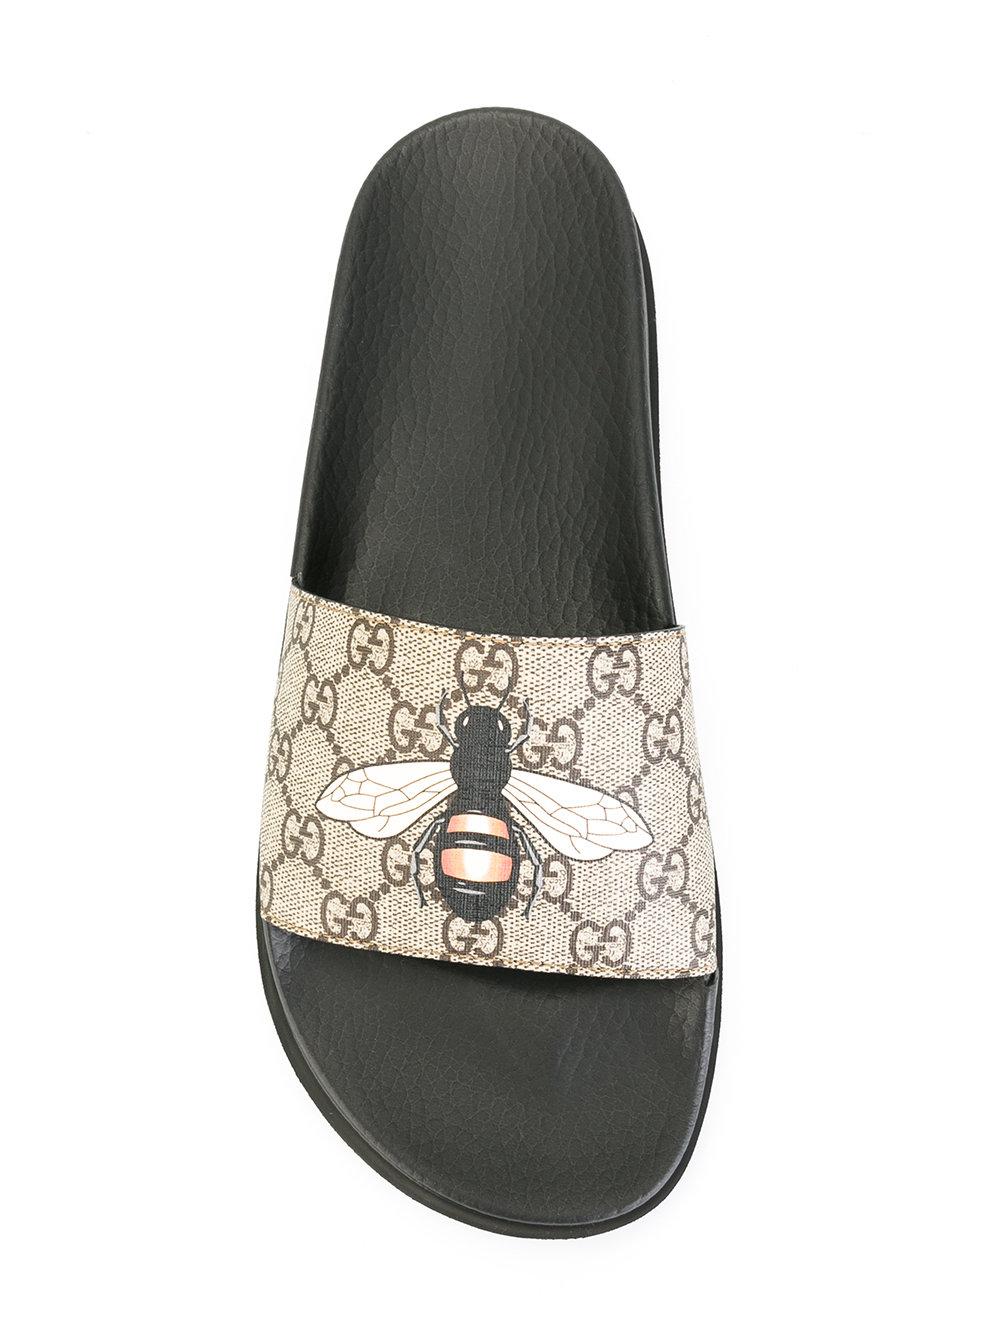 Gucci Gg Supreme Bee Pool Slides in Brown | Lyst